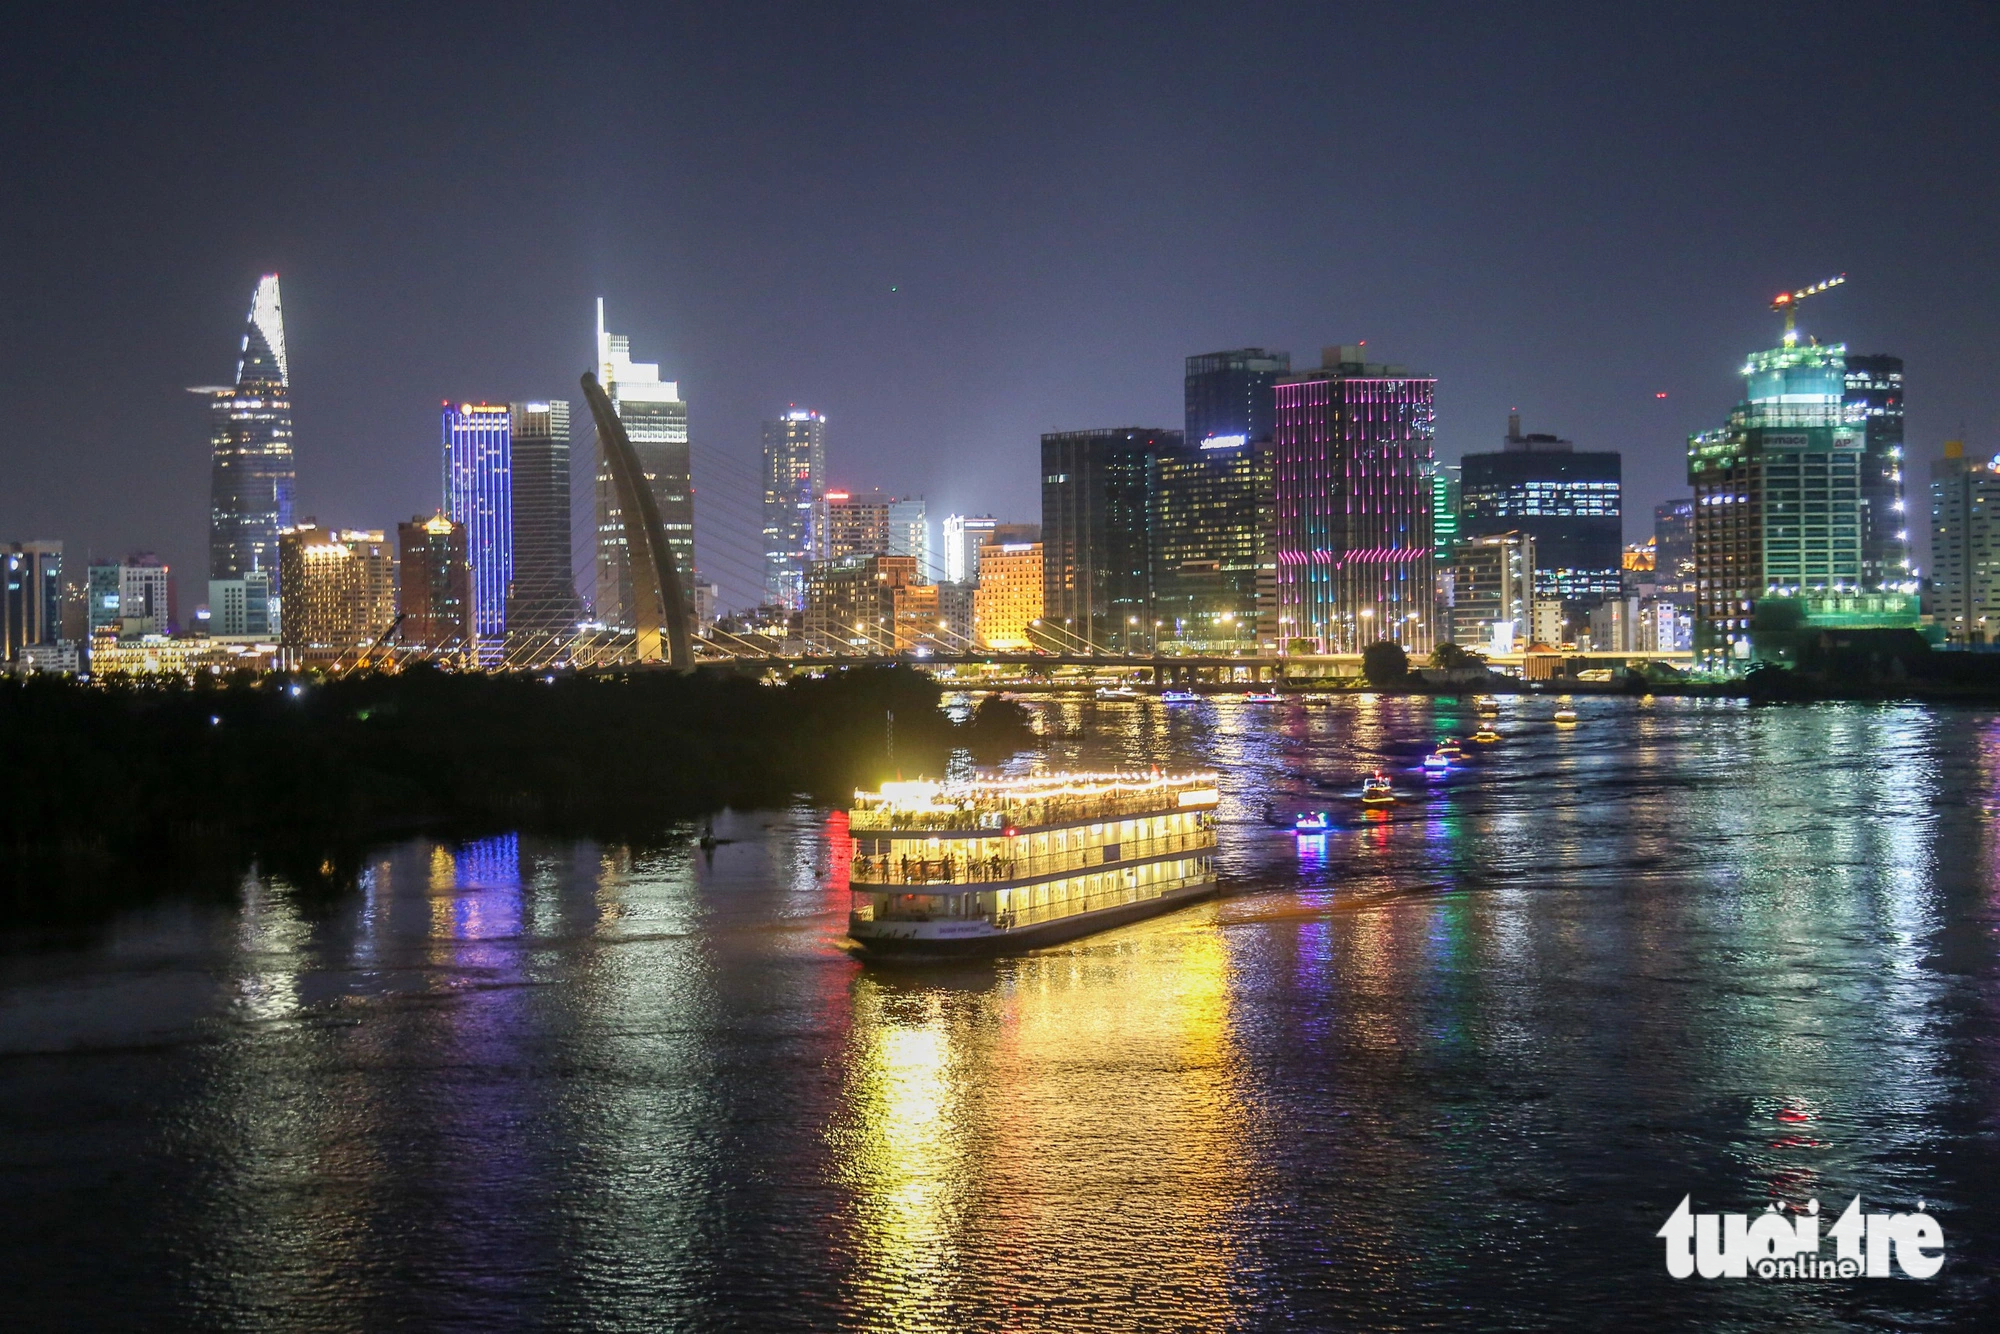 Illuminated boats are on parade near the Ba Son Bridge, which spans over the Saigon River and links District 1 with Thu Duc City in Ho Chi Minh City. Photo: Phuong Quyen / Tuoi Tre